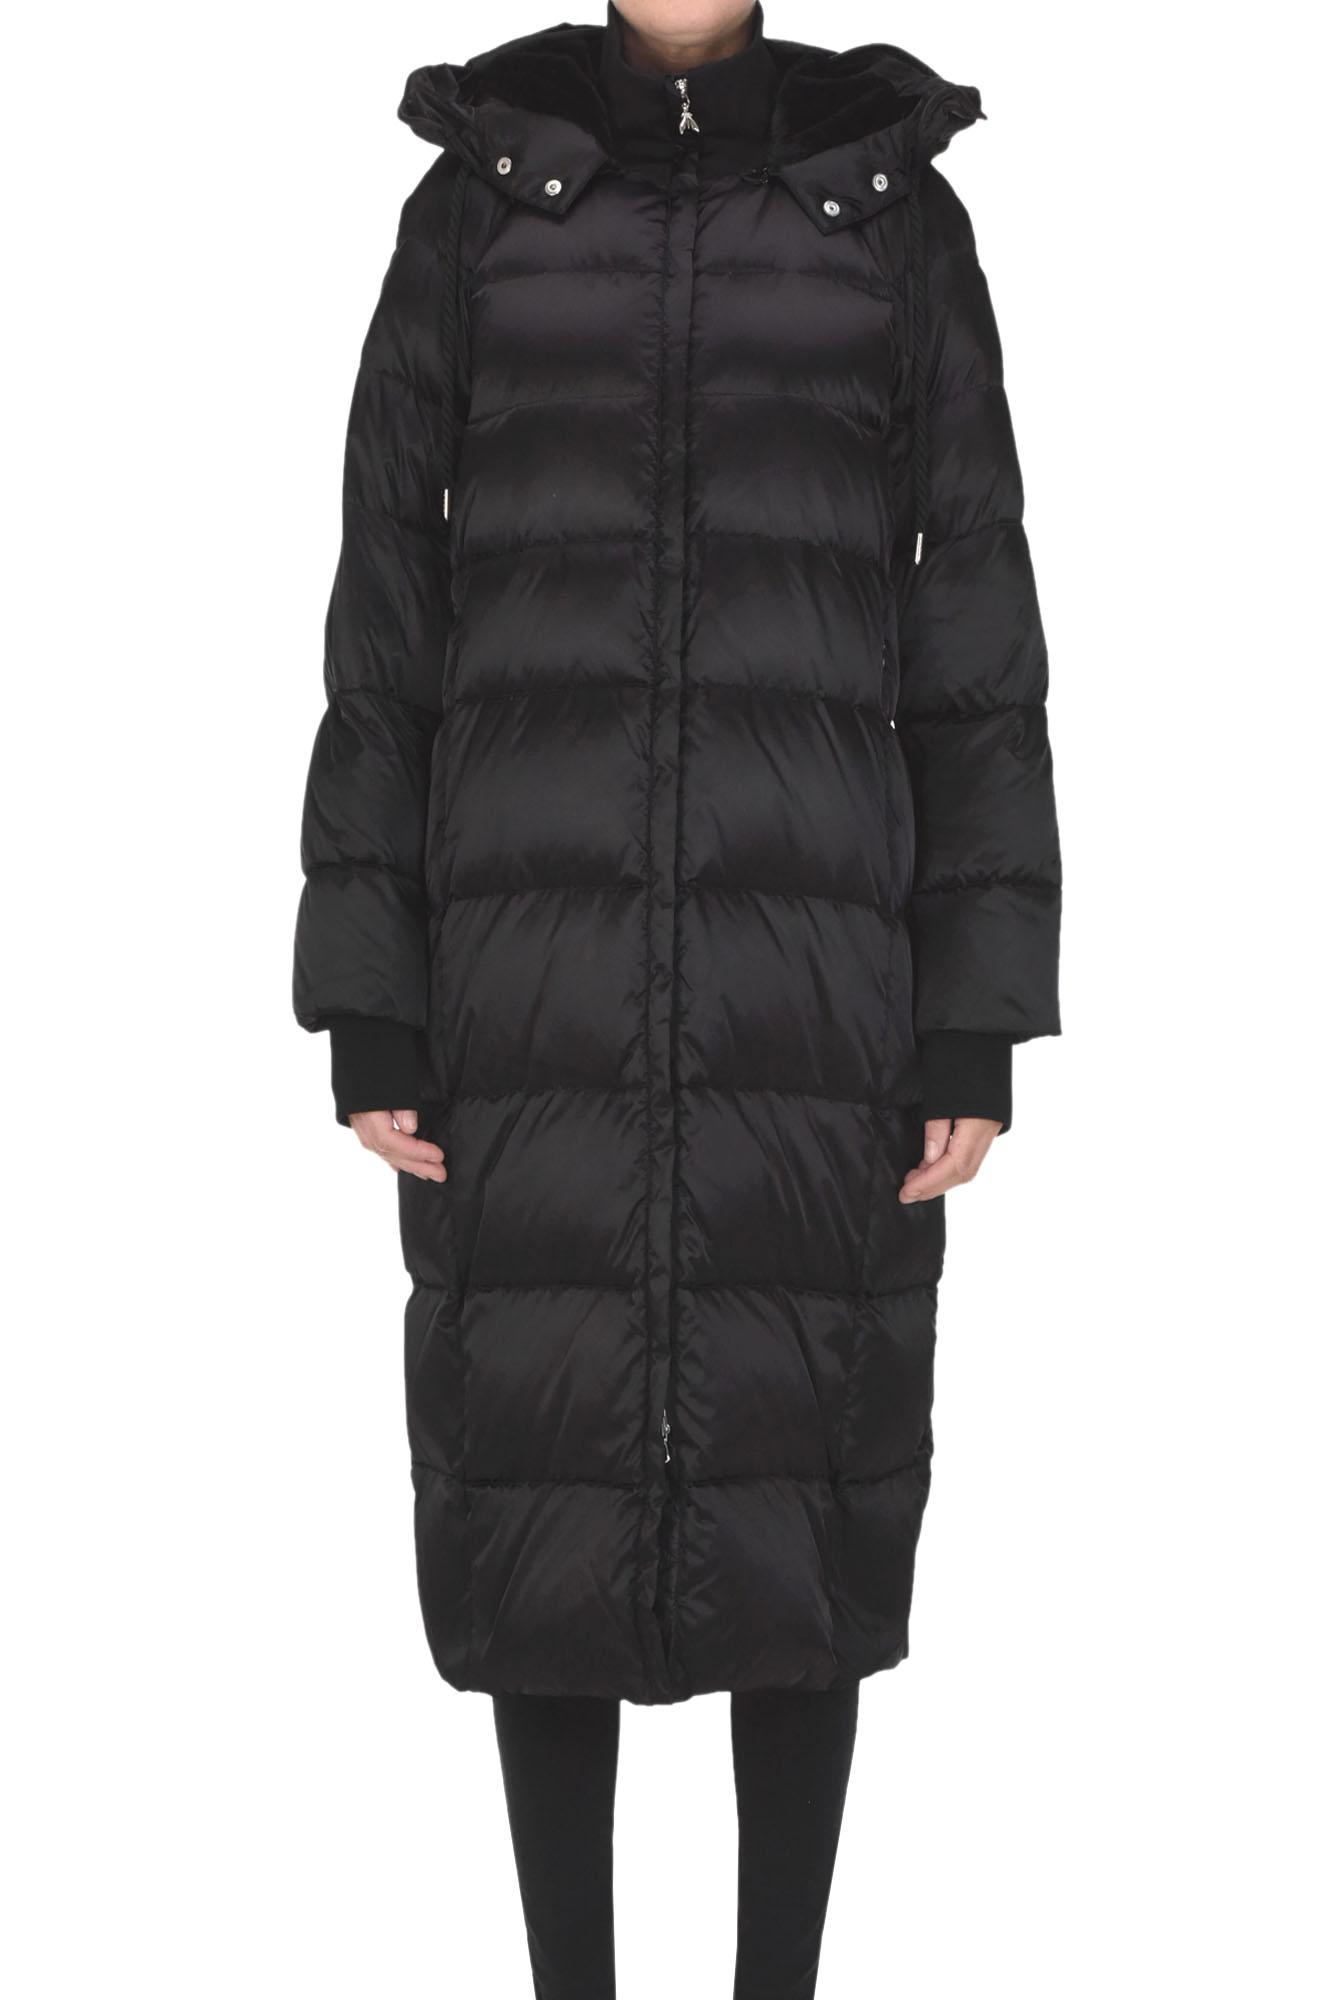 Patrizia Pepe Quilted Jacket